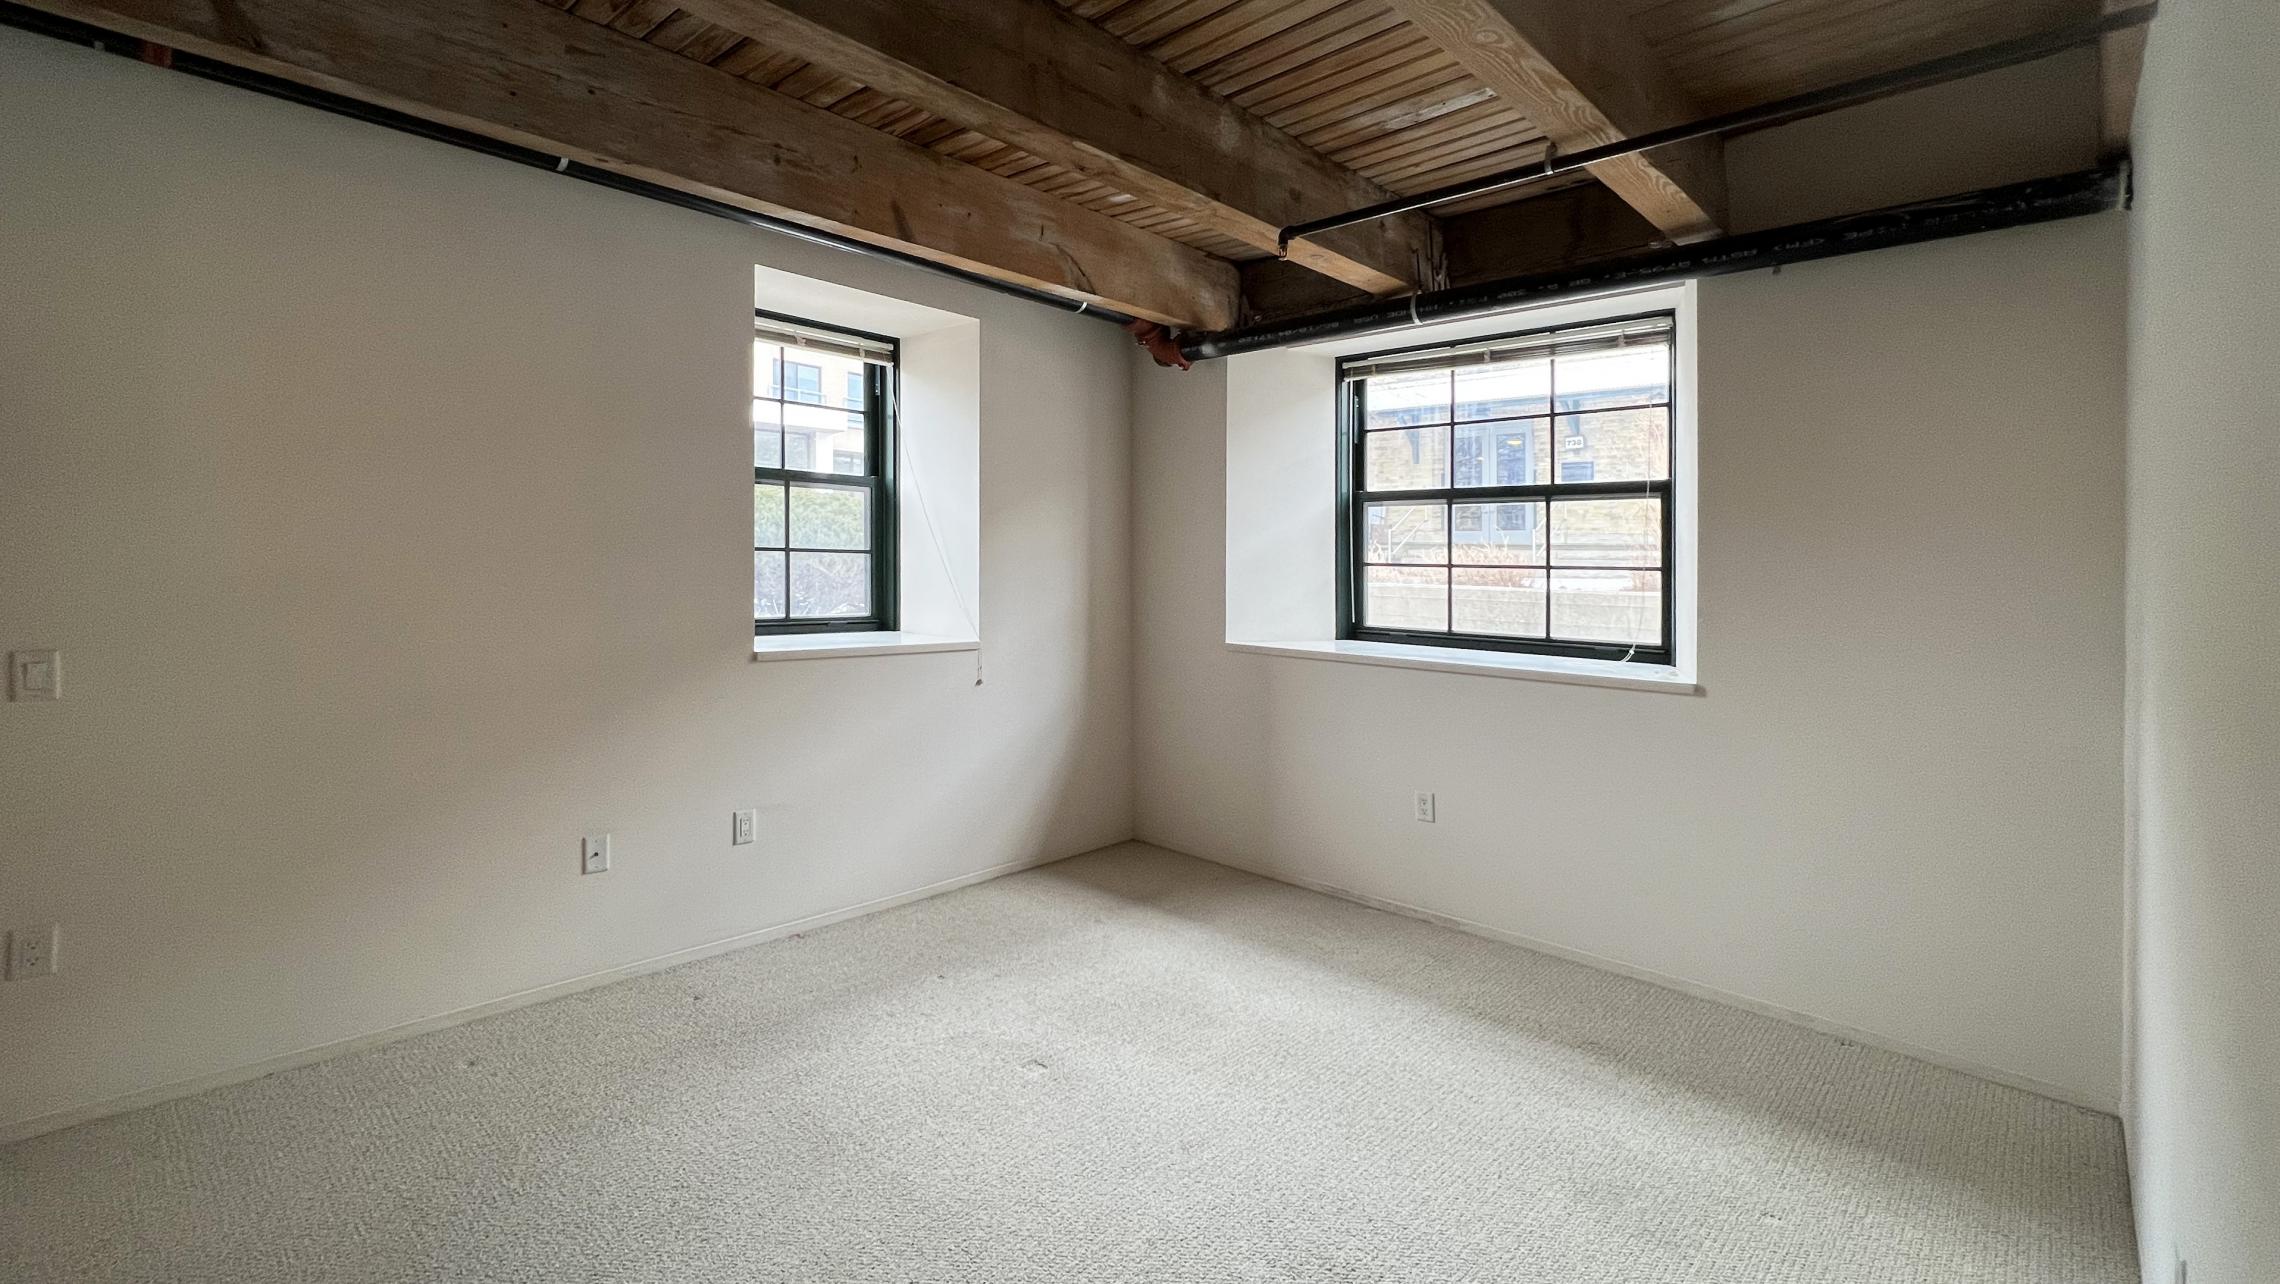 Tobacco-Lofts-at-The-Yards-Apartment-E102-One-Bedroom-Historic-Design-Exposed-Brick-Concrete-Floors-Downtown-Madison-Fitness-Lounge-Courtyard-Views-Cats-Upscale 